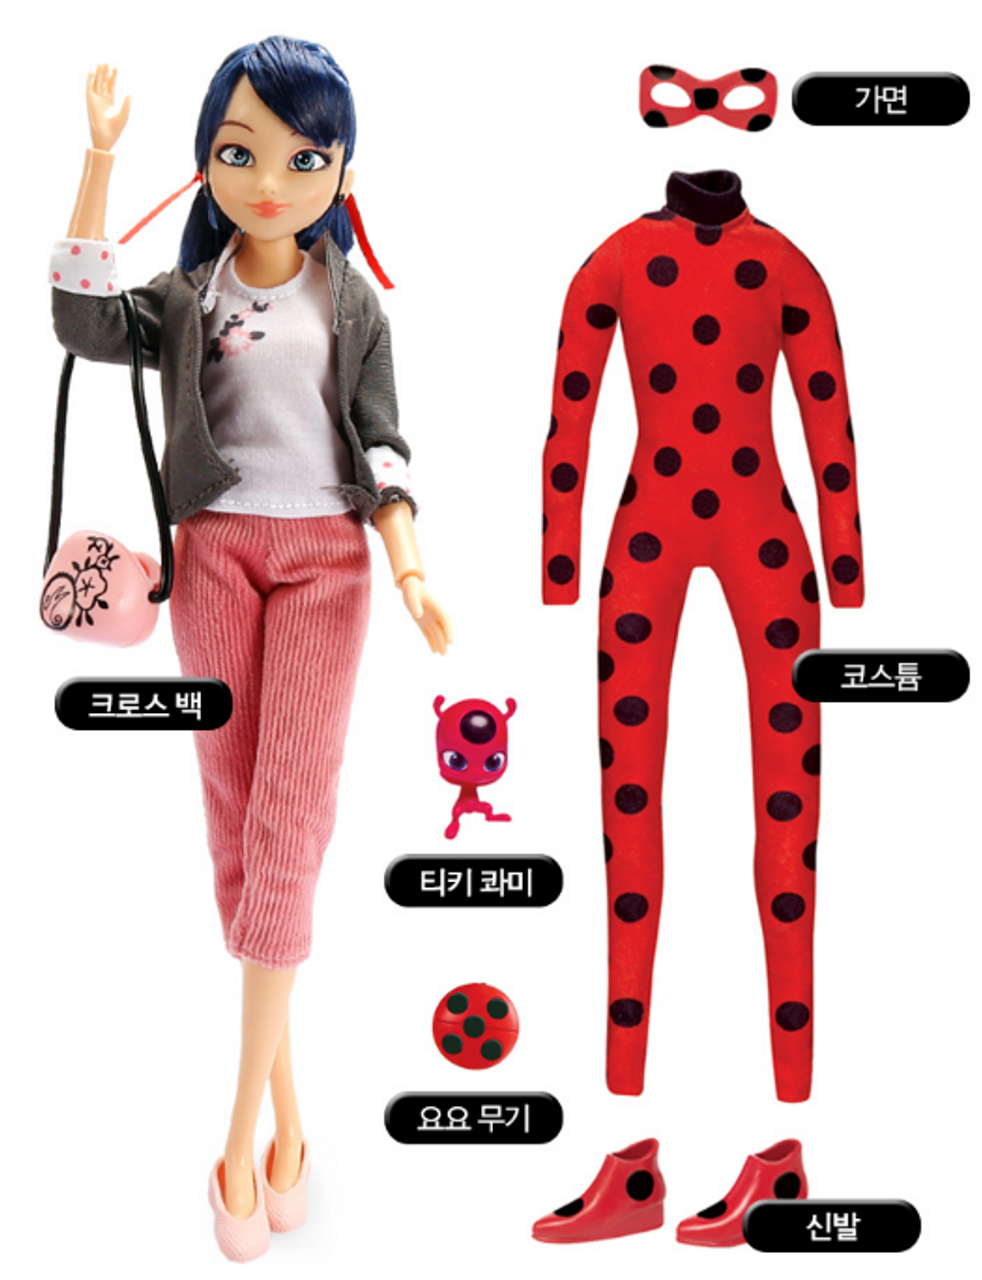 Miraculous Ladybug Marinette Costume Change Doll Toy w/ Accessories